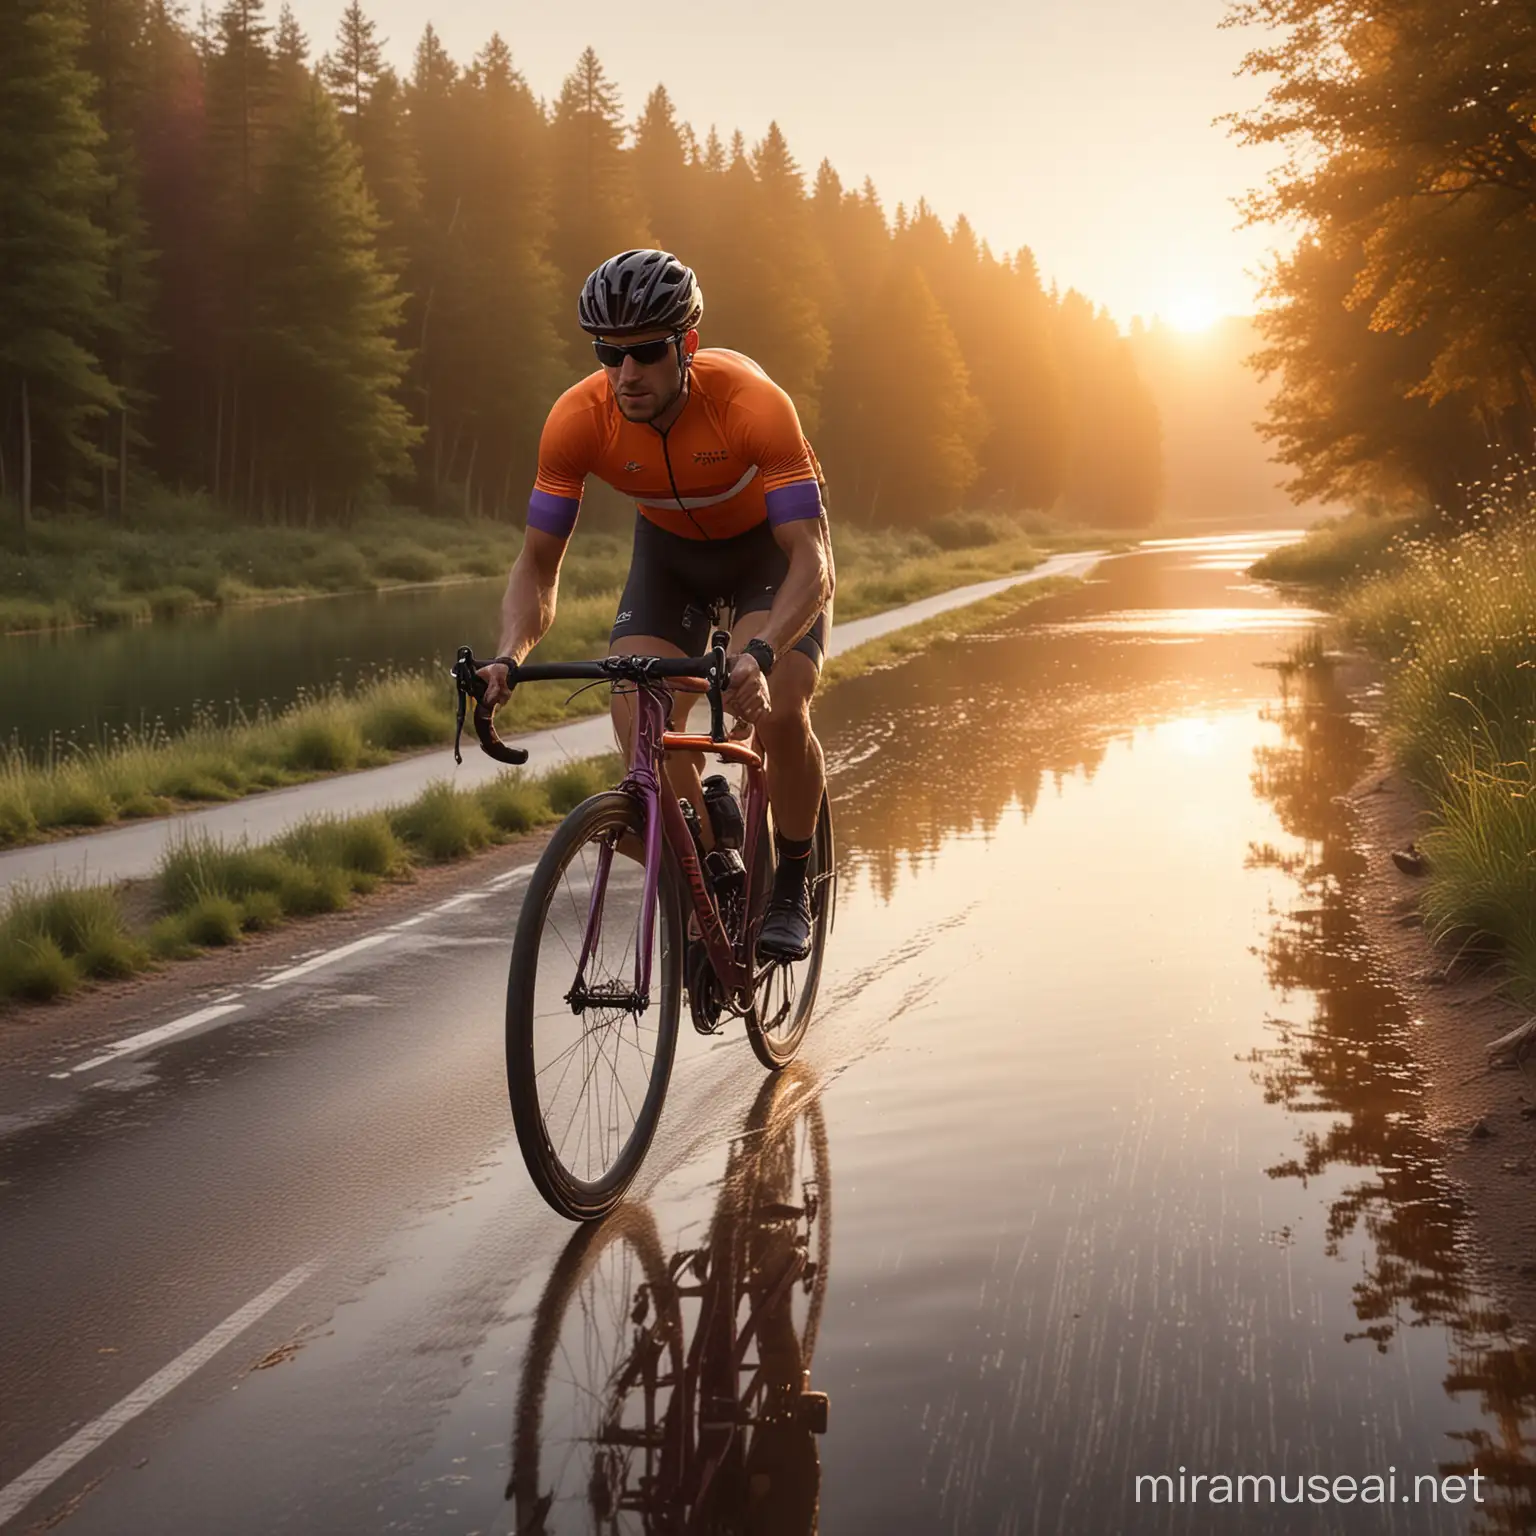 A strikingly realistic digital painting of a cyclist riding along a road adjacent to a serene lake. The image strives for a level of realism that rivals a high-definition photograph, focusing on capturing the cyclist in a moment of fluid motion. The cyclist is dressed in professional cycling gear, complete with a streamlined helmet, tight-fitting cycling jersey, and shorts that reflect the practicality and aesthetics of modern cycling attire. The bike itself is a model of precision engineering, detailed right down to the reflection on its sleek frame and the rotation of its perfectly aligned wheels.
vibrant colors of the sunset providing a backdrop that's both atmospheric and dynamic. Warm hues of orange, red, and purple blend seamlessly, mimicking the natural gradation of colors found during the golden hour.
